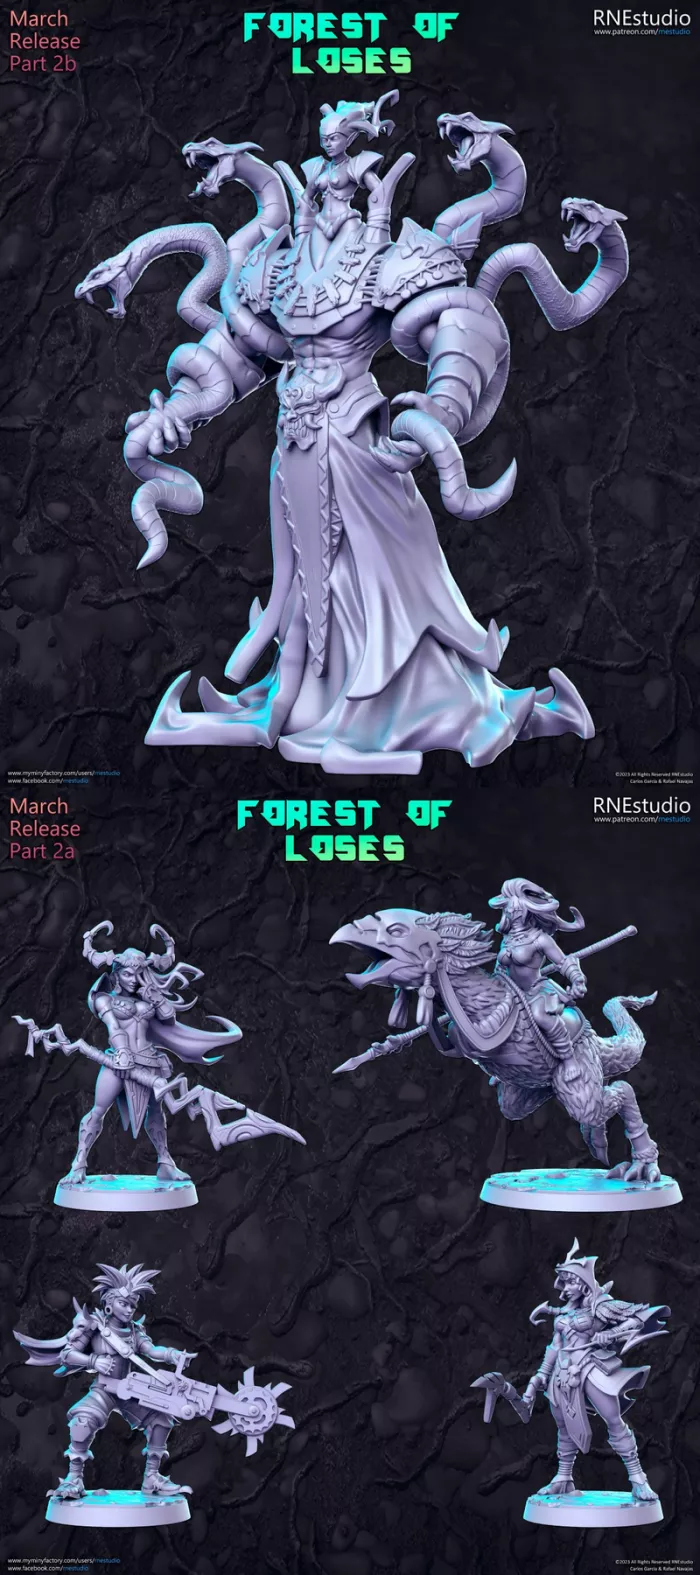 Forest of Loses